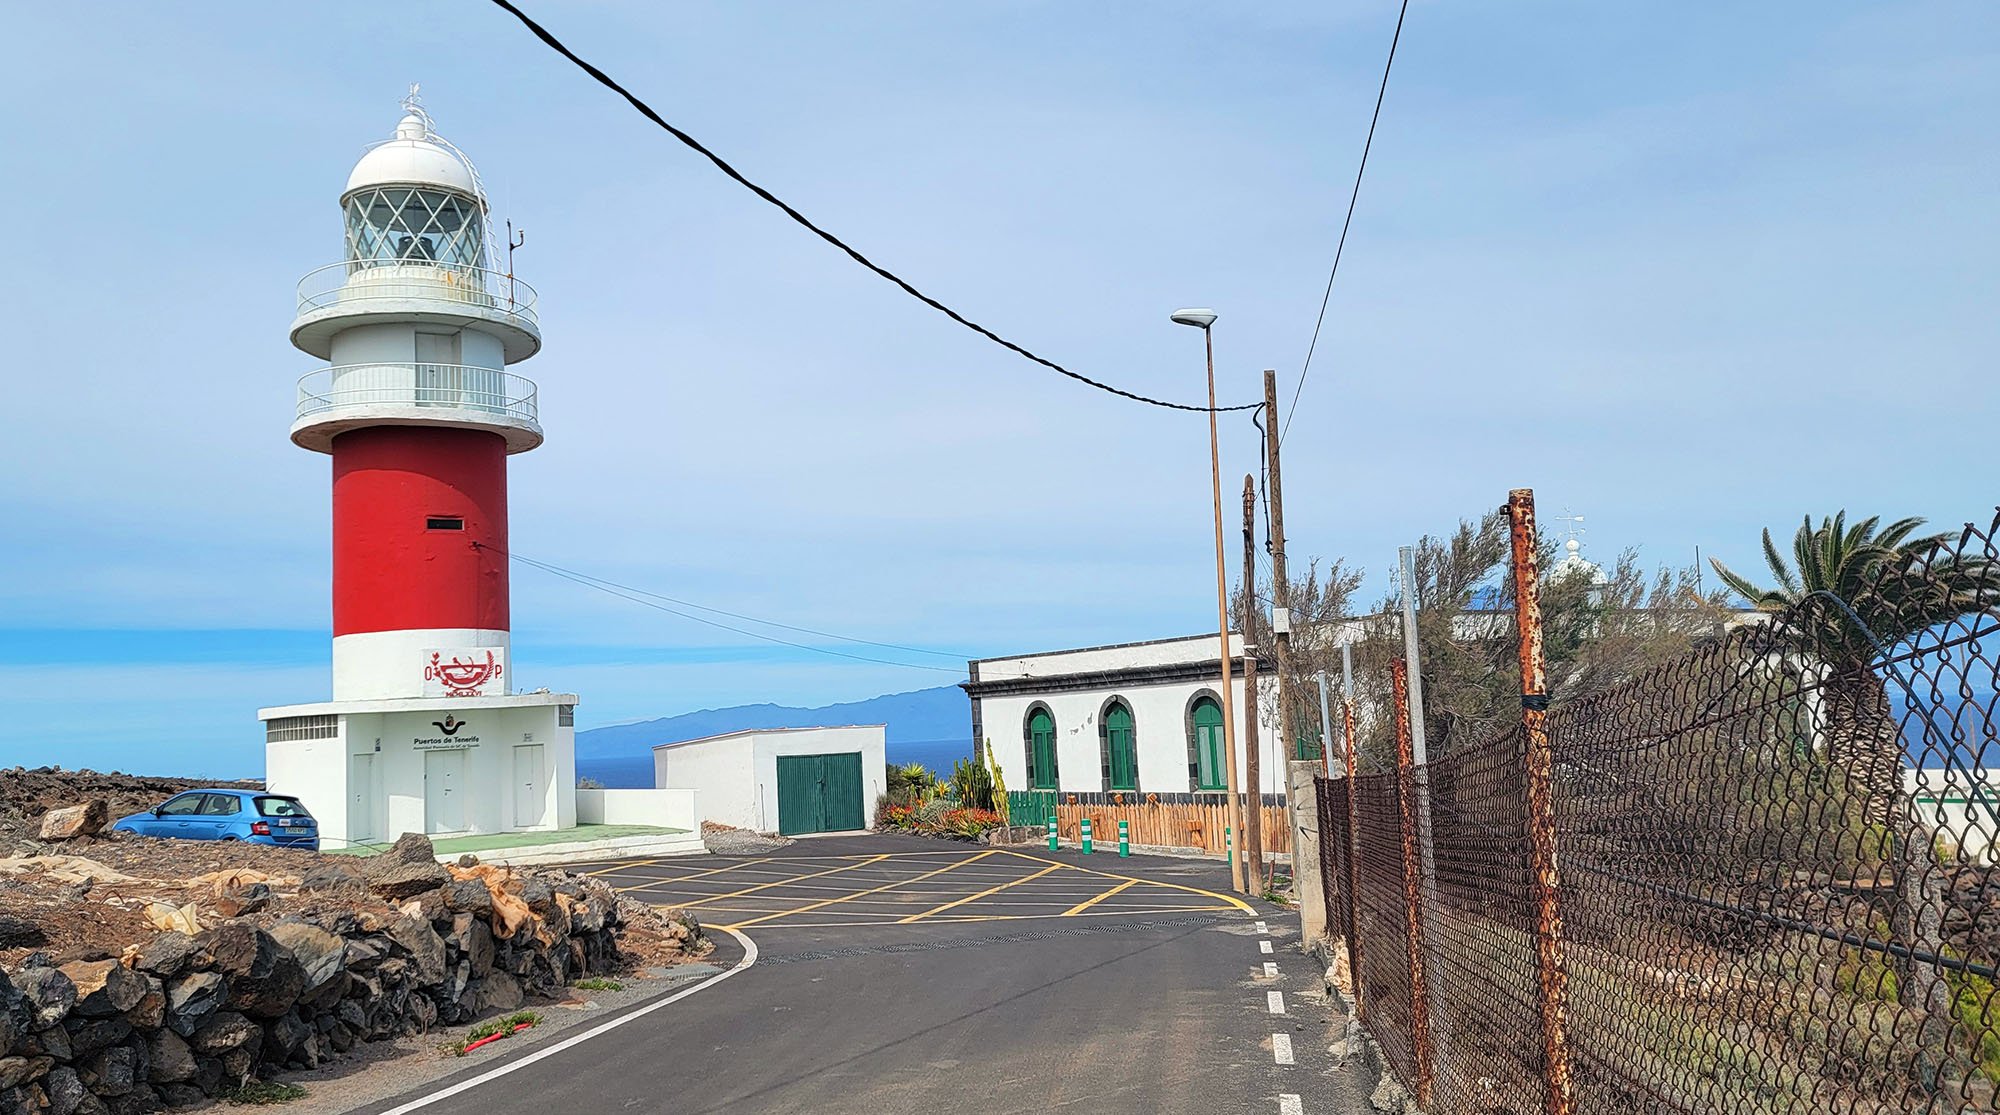 There's a shitty little lighthouse that's very hard to reach in a confusing road network of steep hills. Don't go there.